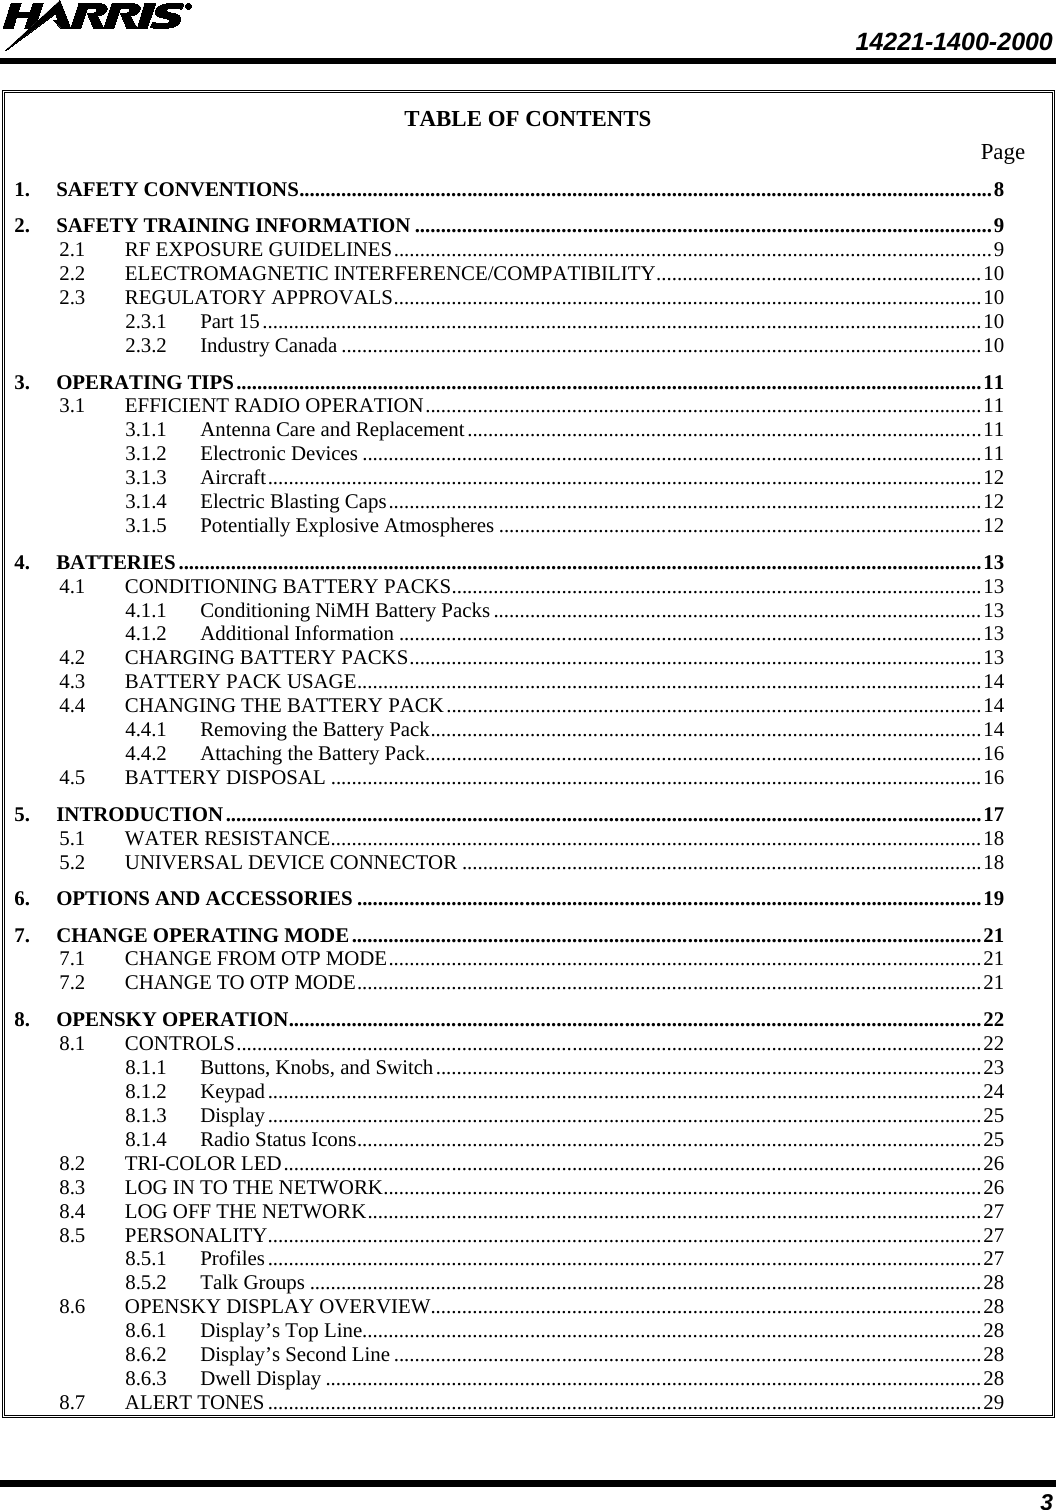  14221-1400-2000  3 TABLE OF CONTENTS Page 1. SAFETY CONVENTIONS .................................................................................................................................... 8 2. SAFETY TRAINING INFORMATION .............................................................................................................. 9 2.1 RF EXPOSURE GUIDELINES .................................................................................................................. 9 2.2 ELECTROMAGNETIC INTERFERENCE/COMPATIBILITY .............................................................. 10 2.3 REGULATORY APPROVALS ................................................................................................................ 10 2.3.1 Part 15 ......................................................................................................................................... 10 2.3.2 Industry Canada .......................................................................................................................... 10 3. OPERATING TIPS .............................................................................................................................................. 11 3.1 EFFICIENT RADIO OPERATION .......................................................................................................... 11 3.1.1 Antenna Care and Replacement .................................................................................................. 11 3.1.2 Electronic Devices ...................................................................................................................... 11 3.1.3 Aircraft ........................................................................................................................................ 12 3.1.4 Electric Blasting Caps ................................................................................................................. 12 3.1.5 Potentially Explosive Atmospheres ............................................................................................ 12 4. BATTERIES ......................................................................................................................................................... 13 4.1 CONDITIONING BATTERY PACKS ..................................................................................................... 13 4.1.1 Conditioning NiMH Battery Packs ............................................................................................. 13 4.1.2 Additional Information ............................................................................................................... 13 4.2 CHARGING BATTERY PACKS ............................................................................................................. 13 4.3 BATTERY PACK USAGE ....................................................................................................................... 14 4.4 CHANGING THE BATTERY PACK ...................................................................................................... 14 4.4.1 Removing the Battery Pack ......................................................................................................... 14 4.4.2 Attaching the Battery Pack.......................................................................................................... 16 4.5 BATTERY DISPOSAL ............................................................................................................................ 16 5. INTRODUCTION ................................................................................................................................................ 17 5.1 WATER RESISTANCE ............................................................................................................................ 18 5.2 UNIVERSAL DEVICE CONNECTOR ................................................................................................... 18 6. OPTIONS AND ACCESSORIES ....................................................................................................................... 19 7. CHANGE OPERATING MODE ........................................................................................................................ 21 7.1 CHANGE FROM OTP MODE ................................................................................................................. 21 7.2 CHANGE TO OTP MODE ....................................................................................................................... 21 8. OPENSKY OPERATION .................................................................................................................................... 22 8.1 CONTROLS .............................................................................................................................................. 22 8.1.1 Buttons, Knobs, and Switch ........................................................................................................ 23 8.1.2 Keypad ........................................................................................................................................ 24 8.1.3 Display ........................................................................................................................................ 25 8.1.4 Radio Status Icons ....................................................................................................................... 25 8.2 TRI-COLOR LED ..................................................................................................................................... 26 8.3 LOG IN TO THE NETWORK .................................................................................................................. 26 8.4 LOG OFF THE NETWORK ..................................................................................................................... 27 8.5 PERSONALITY ........................................................................................................................................ 27 8.5.1 Profiles ........................................................................................................................................ 27 8.5.2 Talk Groups ................................................................................................................................ 28 8.6 OPENSKY DISPLAY OVERVIEW ......................................................................................................... 28 8.6.1 Display’s Top Line...................................................................................................................... 28 8.6.2 Display’s Second Line ................................................................................................................ 28 8.6.3 Dwell Display ............................................................................................................................. 28 8.7 ALERT TONES ........................................................................................................................................ 29 